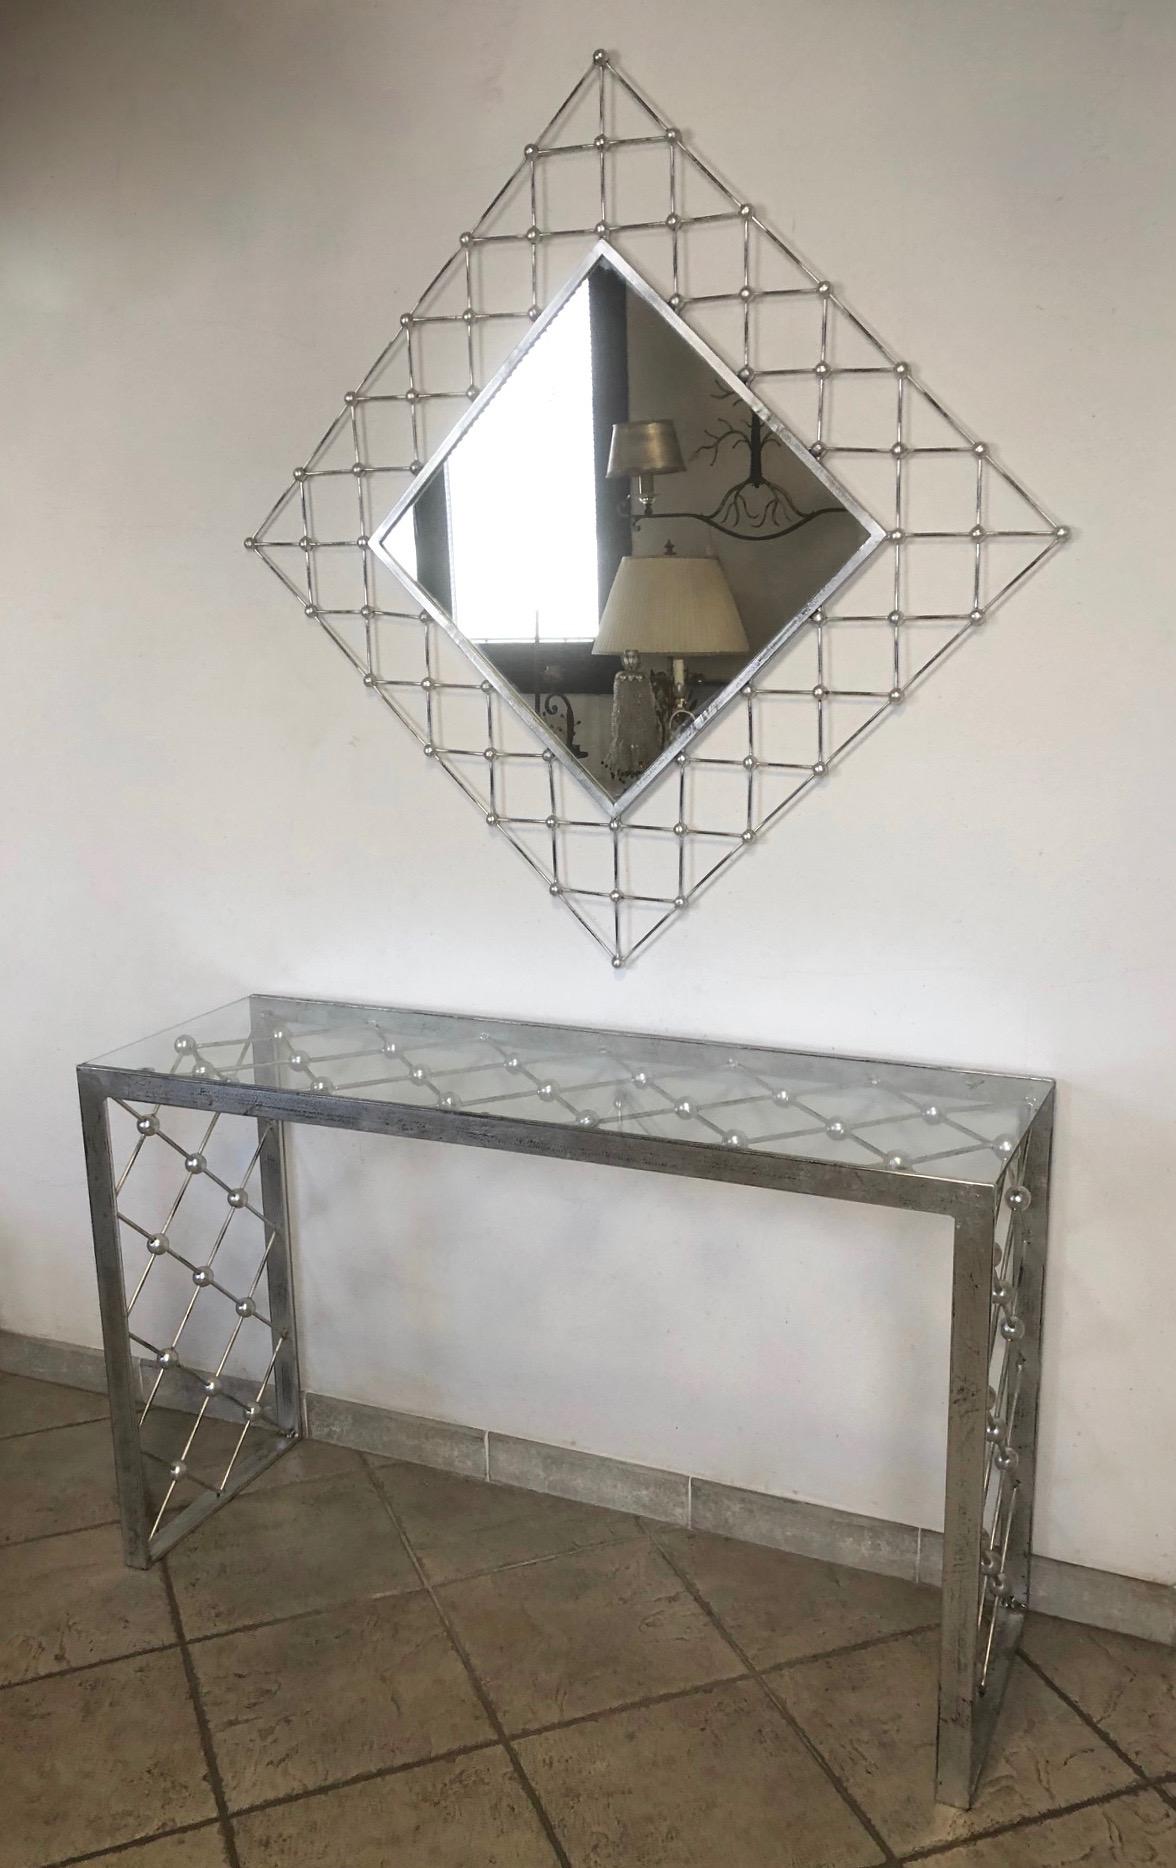 Contemporary Italian Modern Industrial Design Criss Cross Fretwork Iron Console / Entry Table For Sale